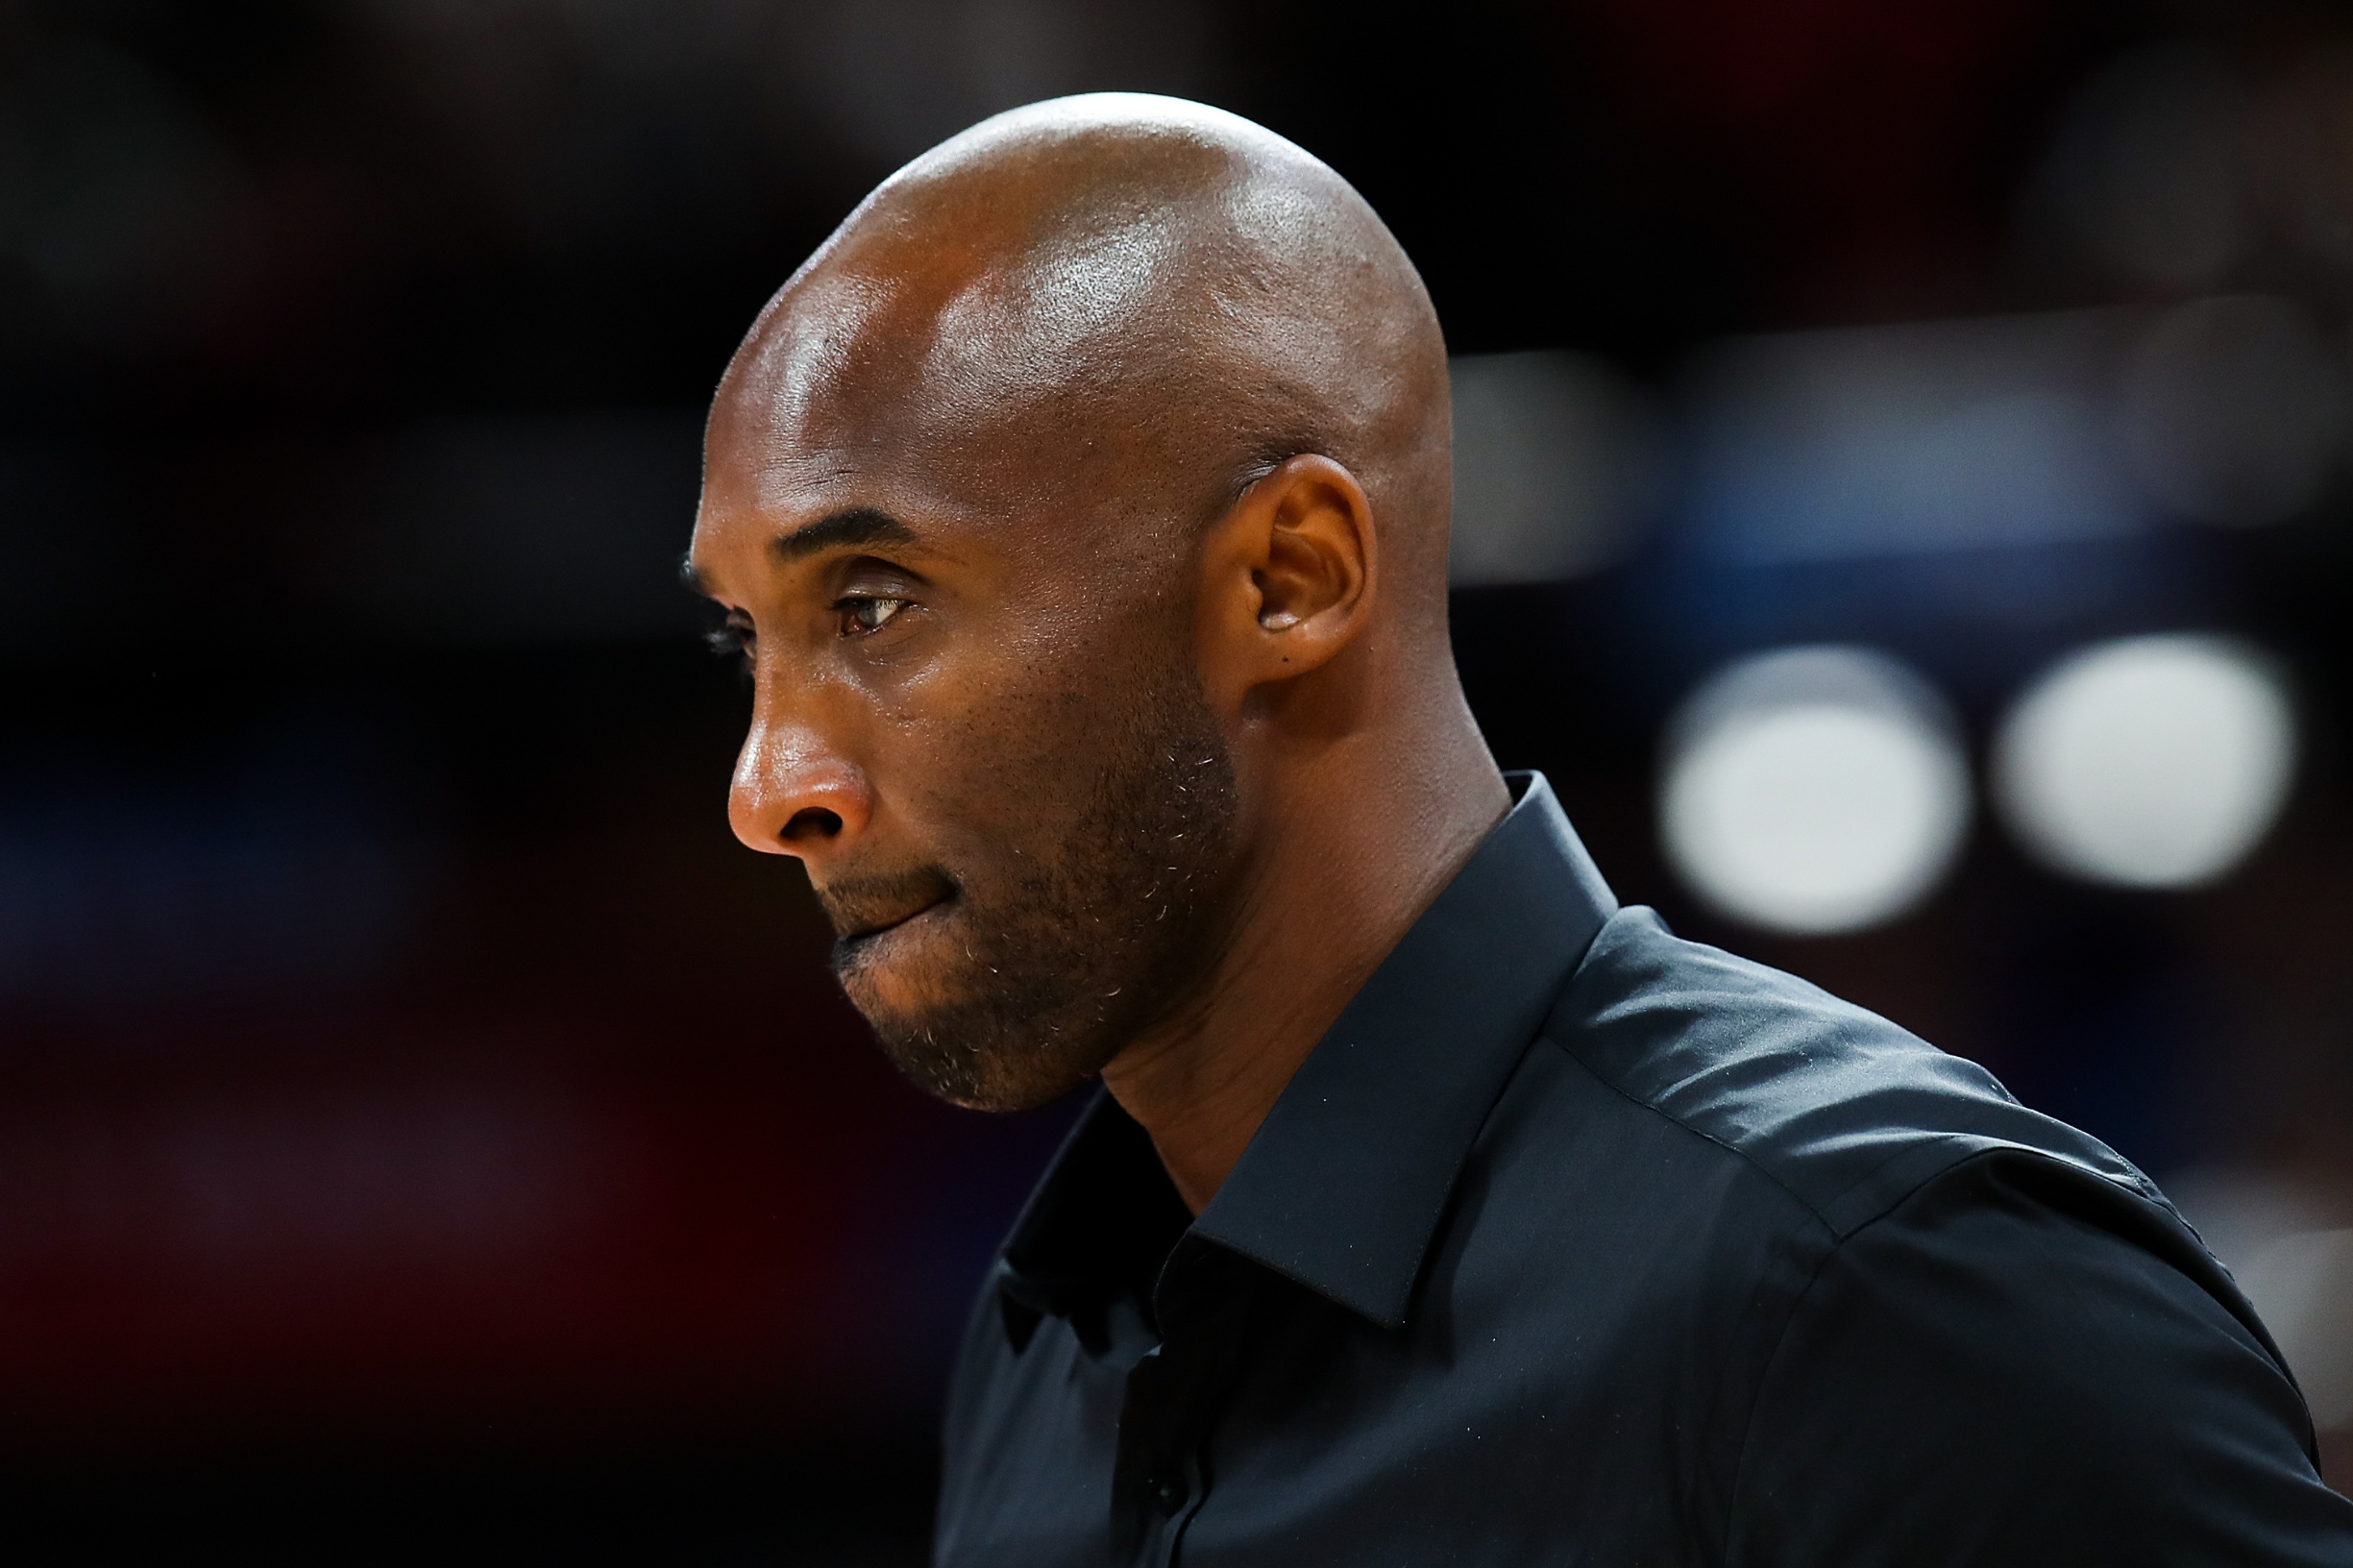 BEIJING, CHINA - SEPTEMBER 15:  NBA Legends Kobe Bryant takes part in a ceremony during FIBA World Cup 2019 final match between Argentina and Spain at Beijing Wukesong Sport Arena on September 15, 2019 in Beijing, China.  (Photo by Lintao Zhang/Getty Images)